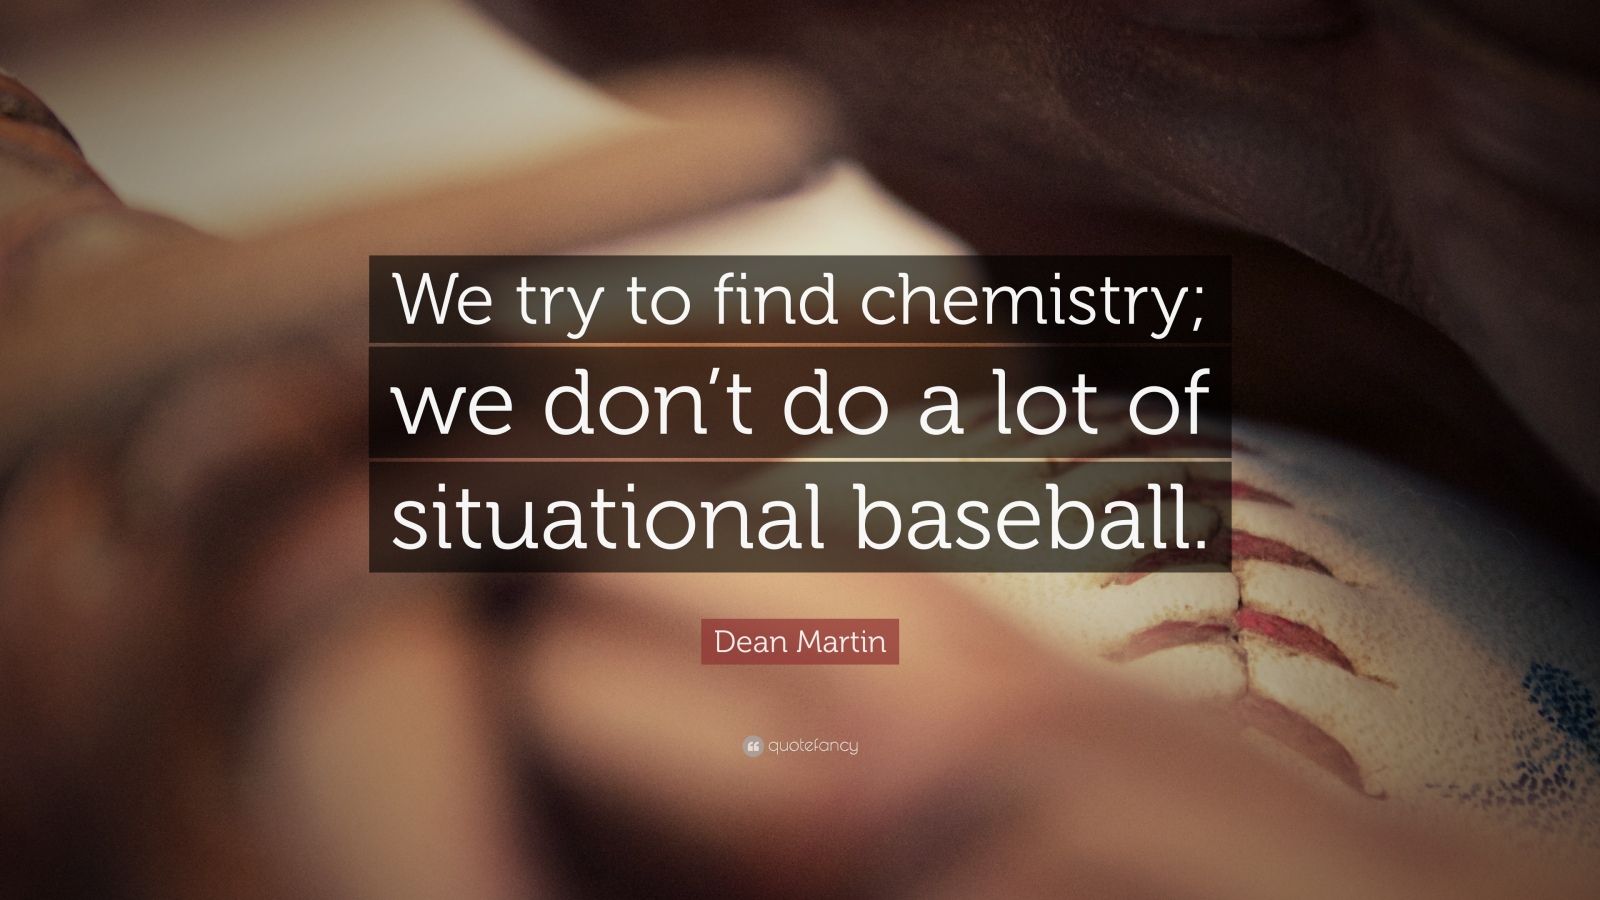 Dean Martin Quote: “We try to find chemistry; we don’t do a lot of situational baseball.”